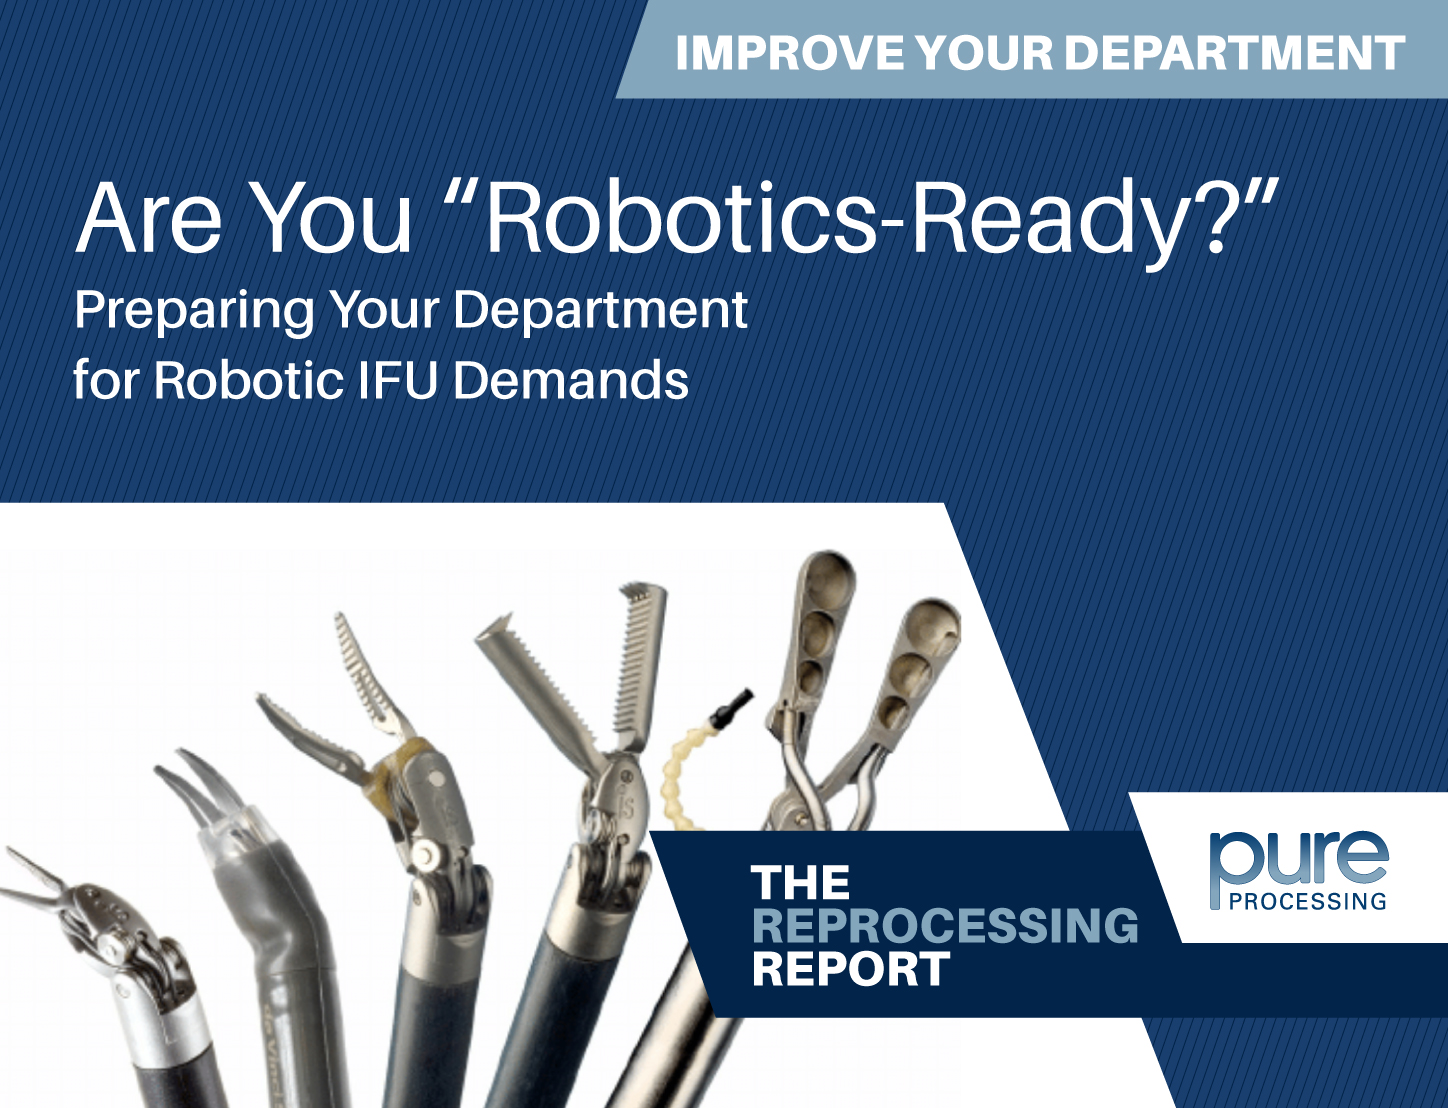 Are You Robotics-Ready - Preparing Your Department for the Demands of Robotic IFUs